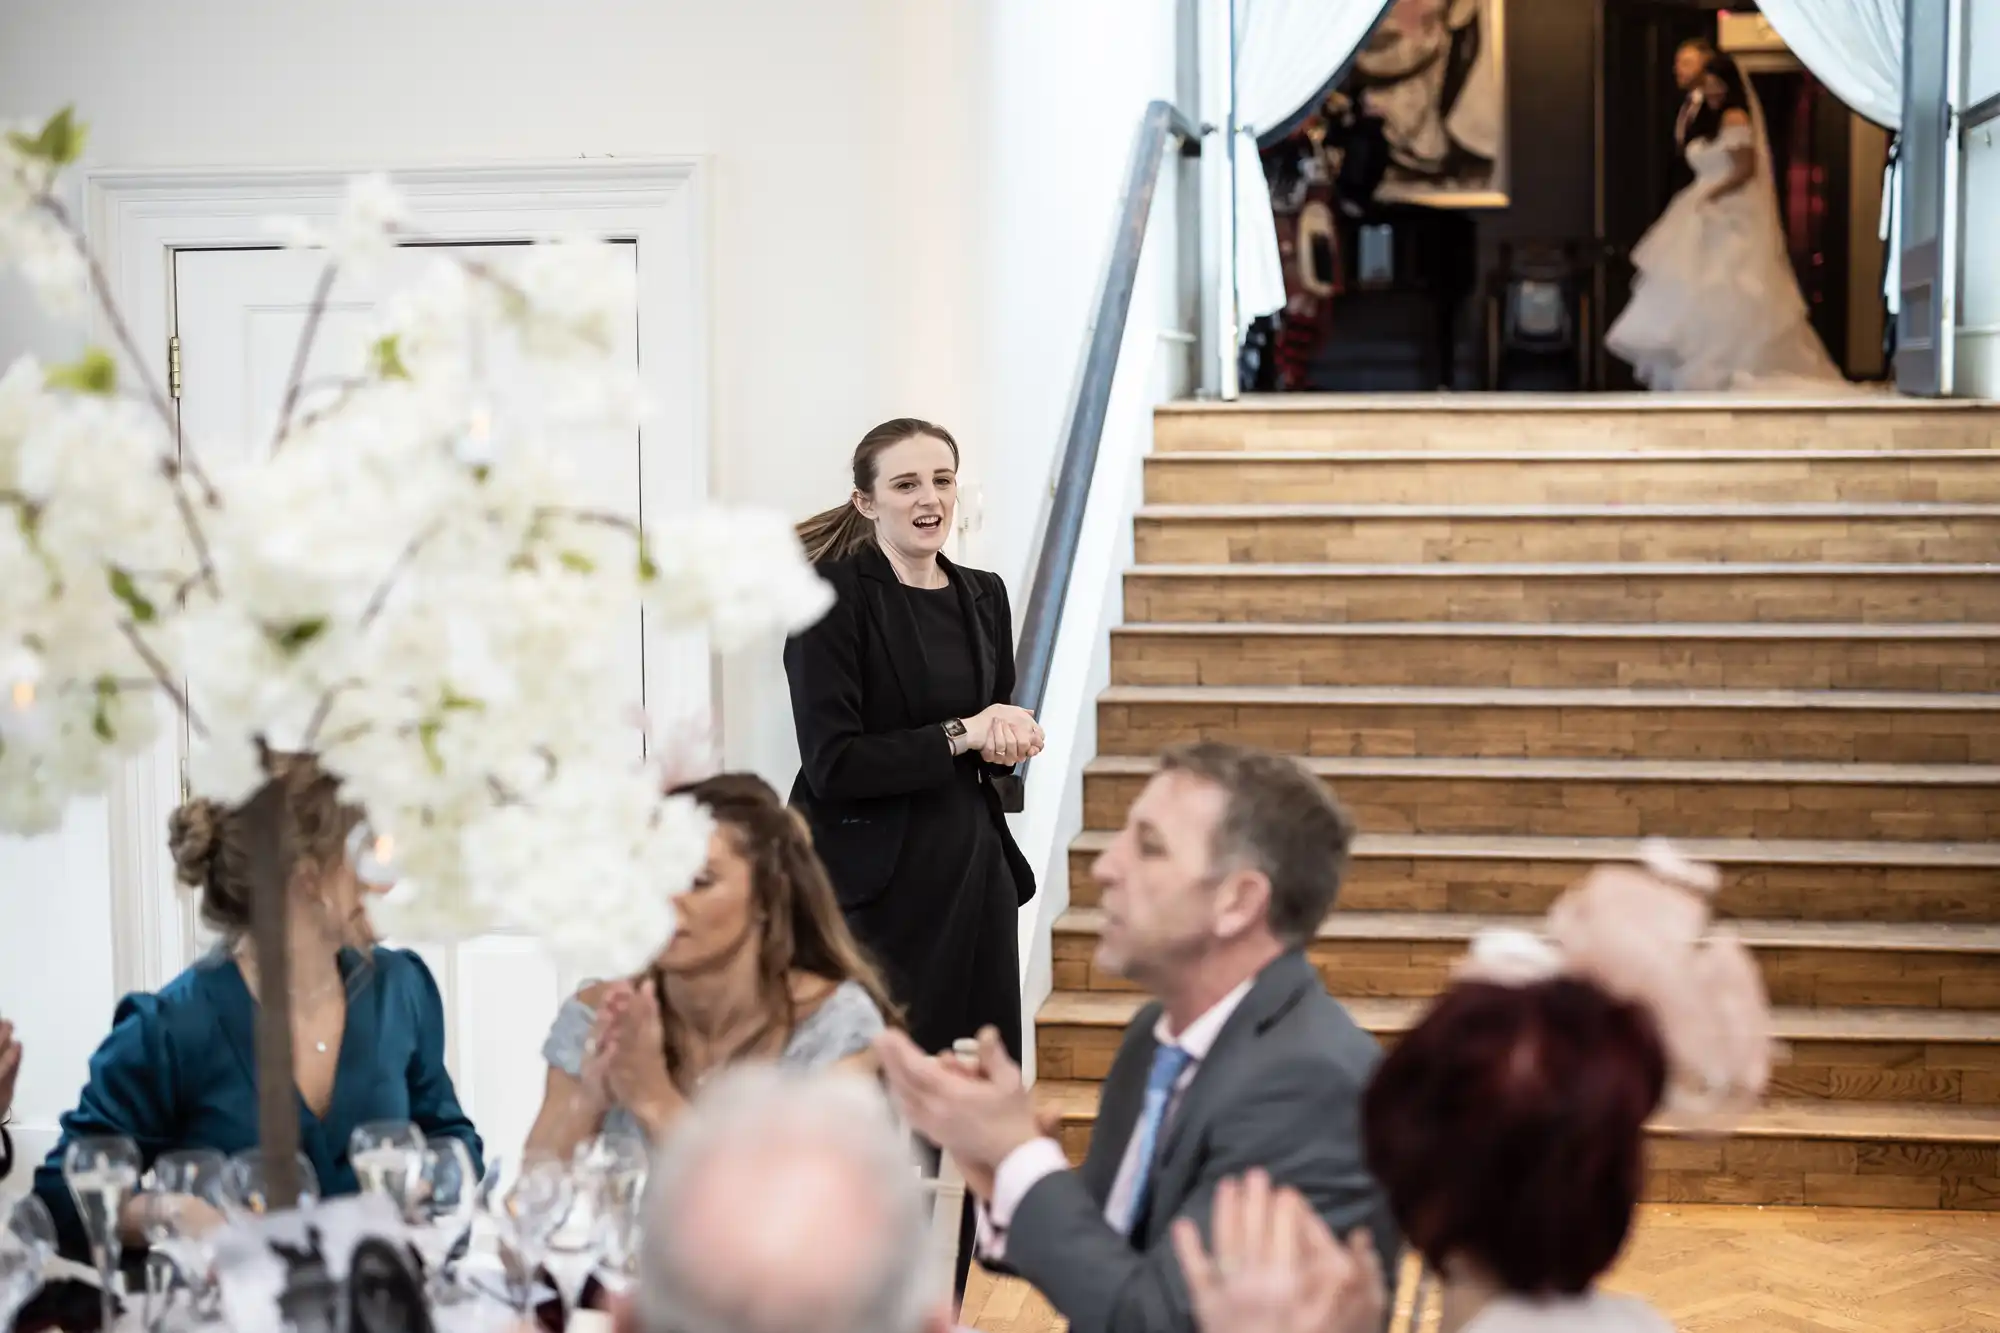 A woman in a black outfit stands near stairs, smiling, while guests at a table applaud in a bright room with floral decor. Another woman in a white dress is partially visible at the top of the stairs.